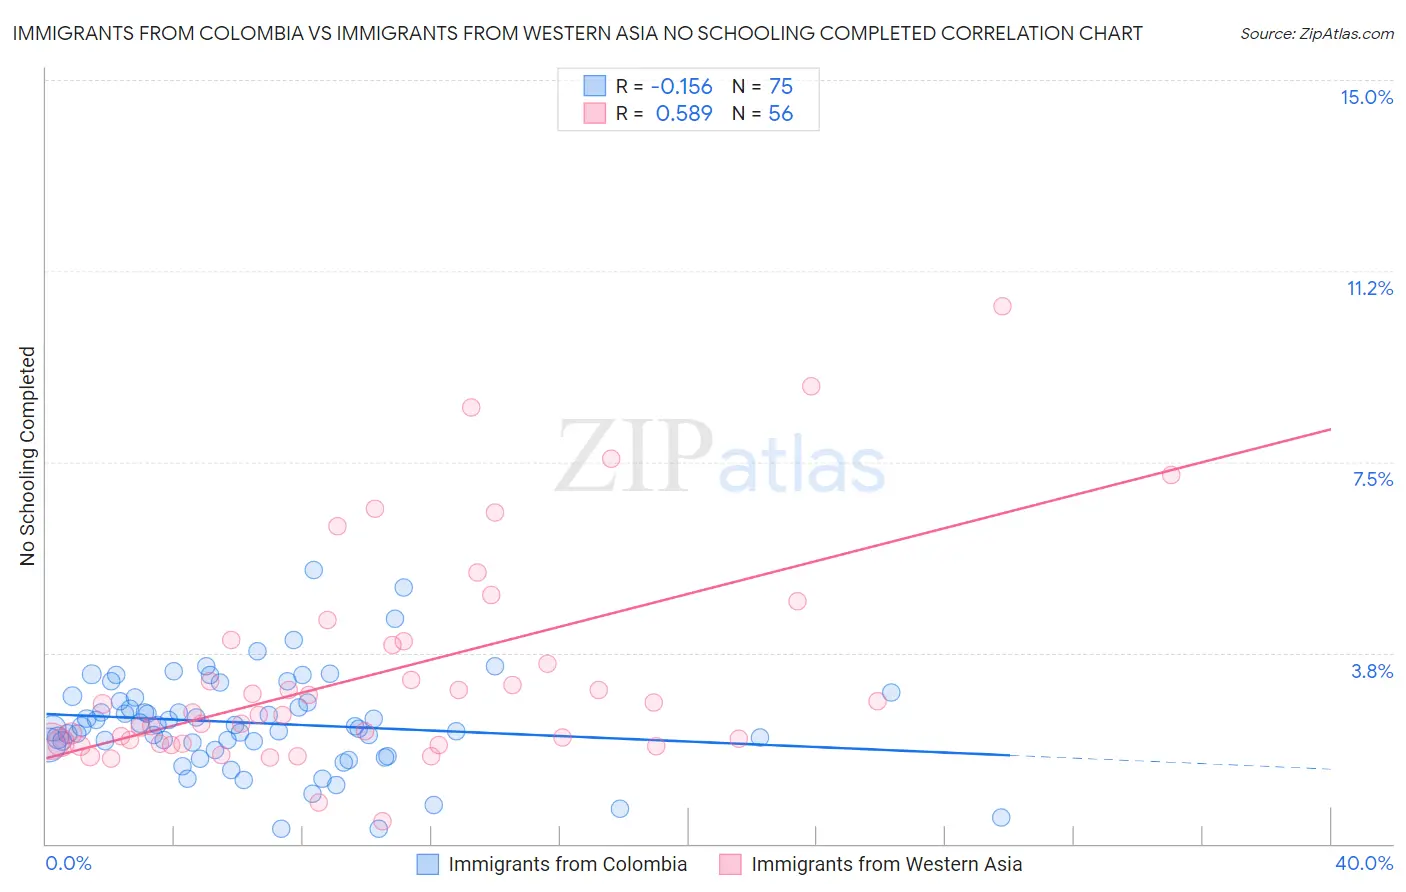 Immigrants from Colombia vs Immigrants from Western Asia No Schooling Completed